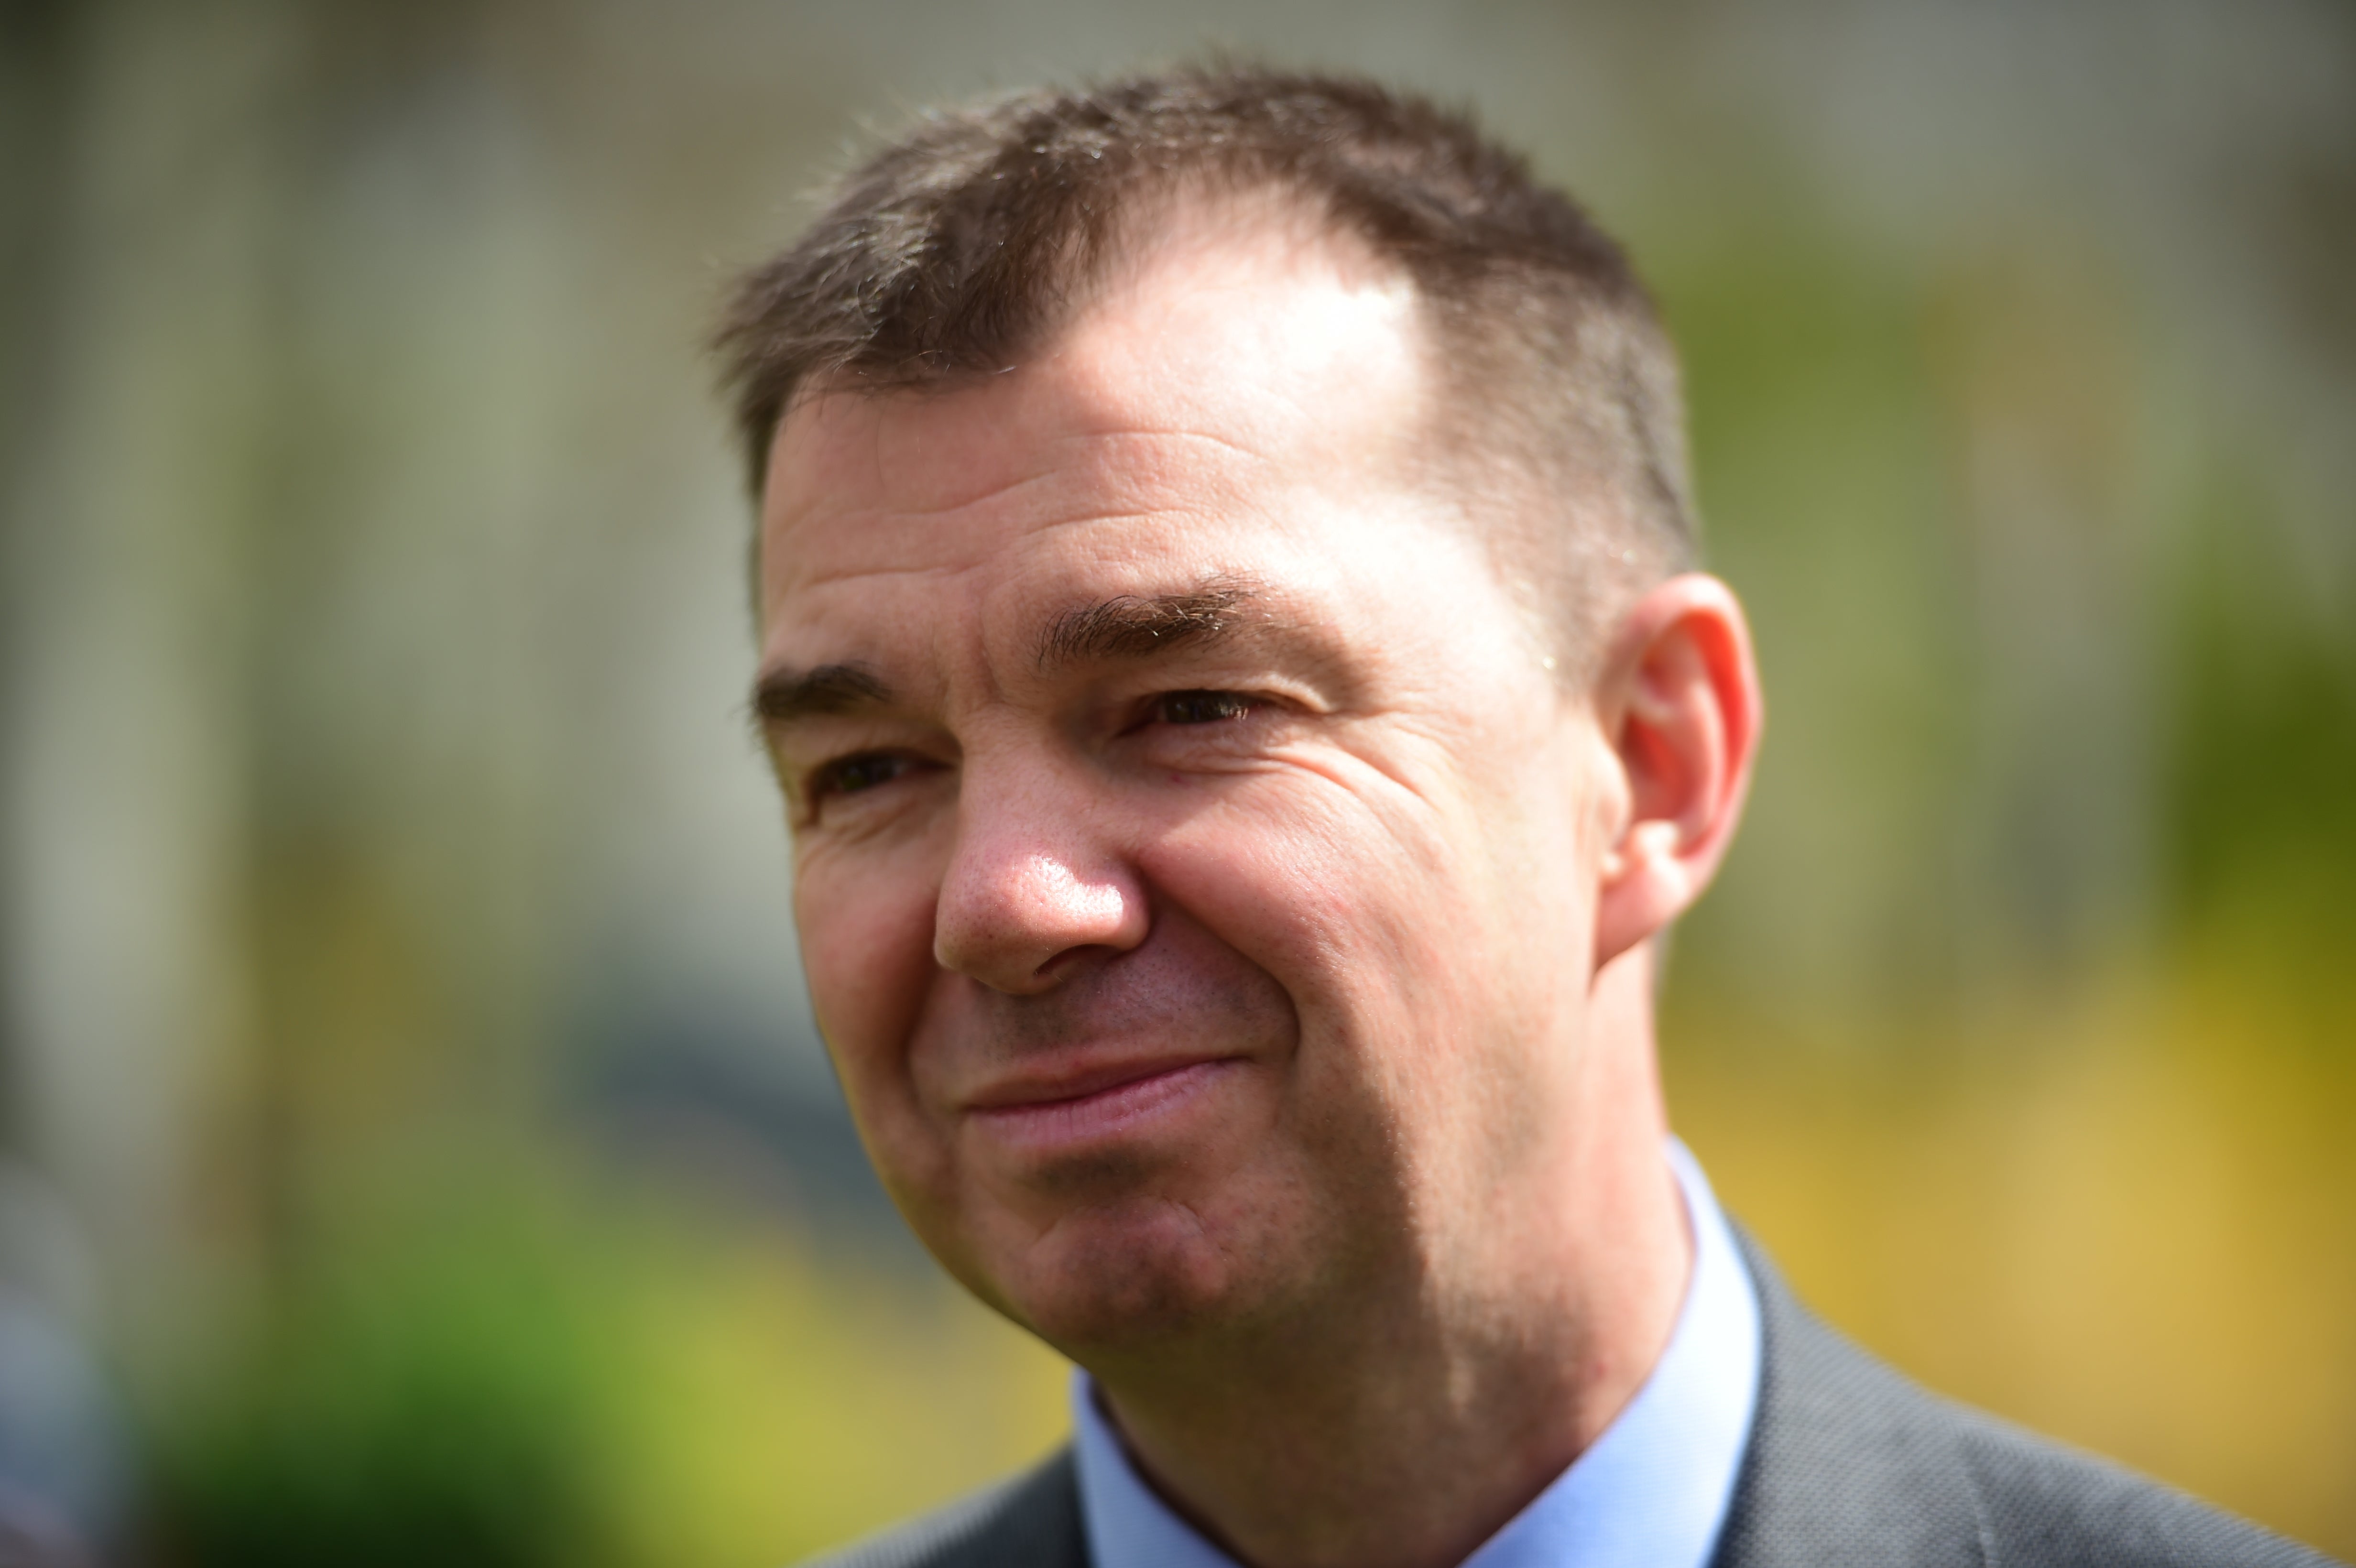 People could be given nudges earlier in their adult lives to help their wealth and overall wellbeing, pensions and financial inclusion minister Guy Opperman has suggested (David Mirzoeff/PA)